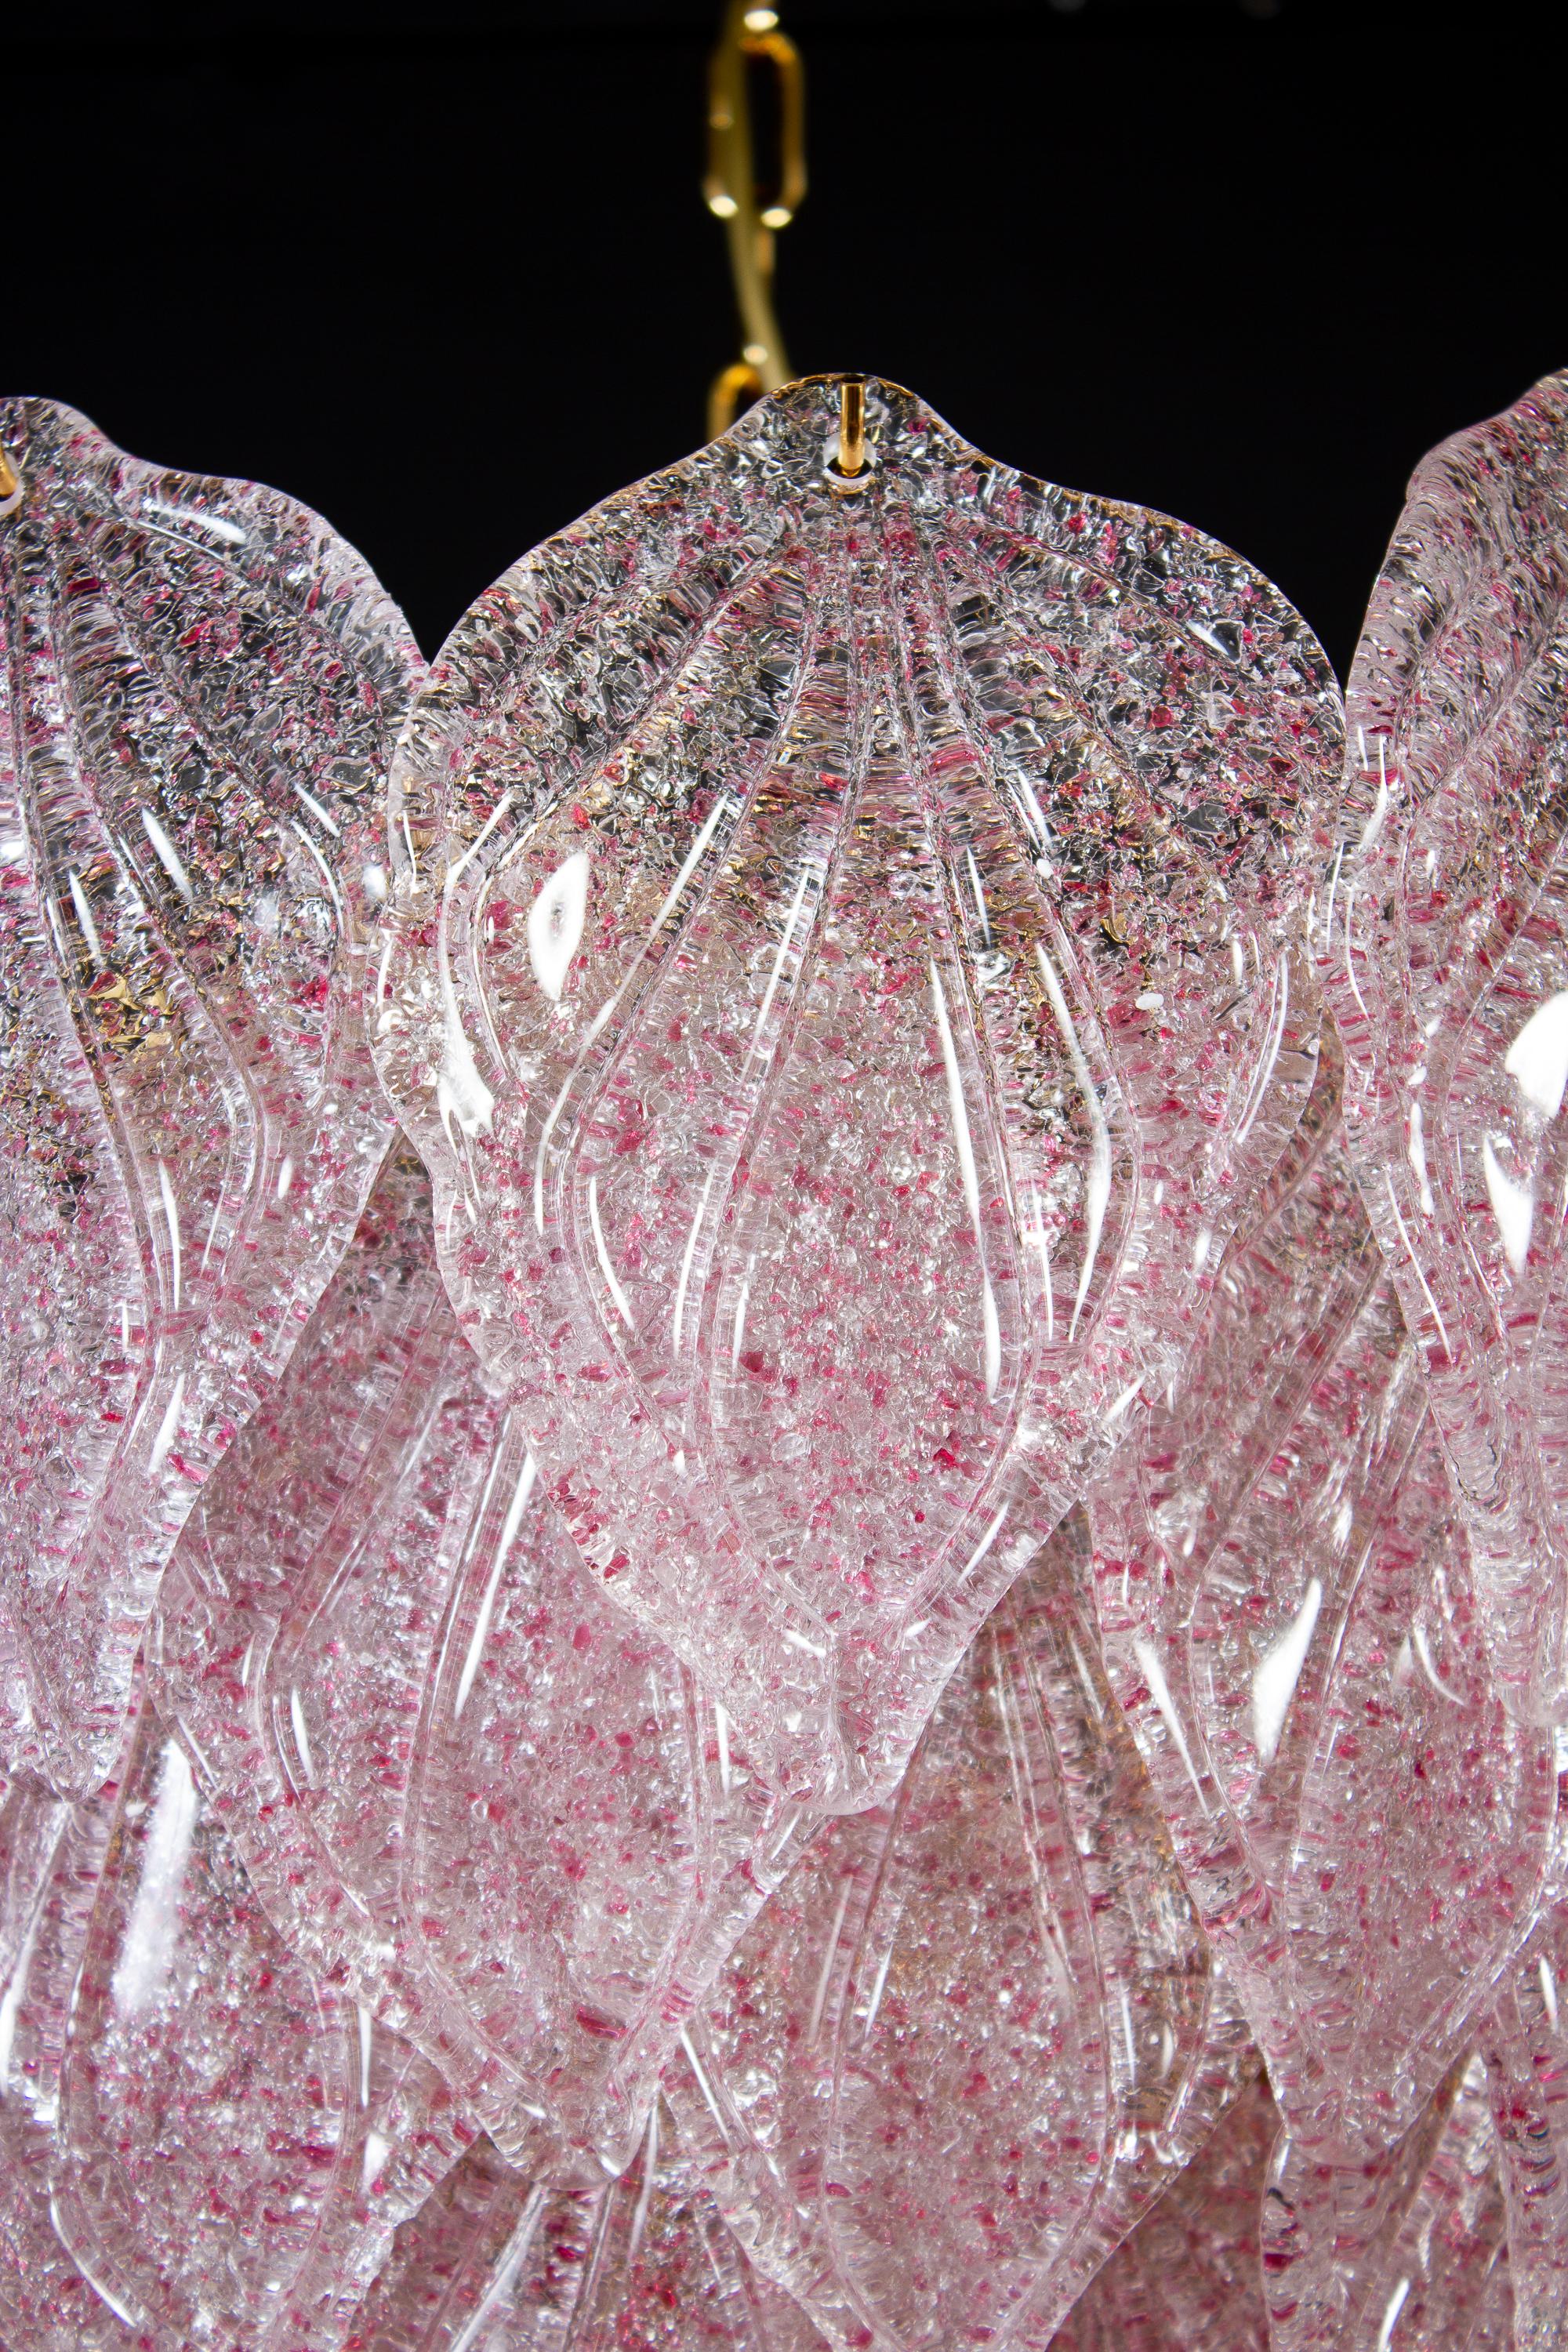  Pink Murano Glass Polar Chandelier, Italy, 1970s For Sale 2